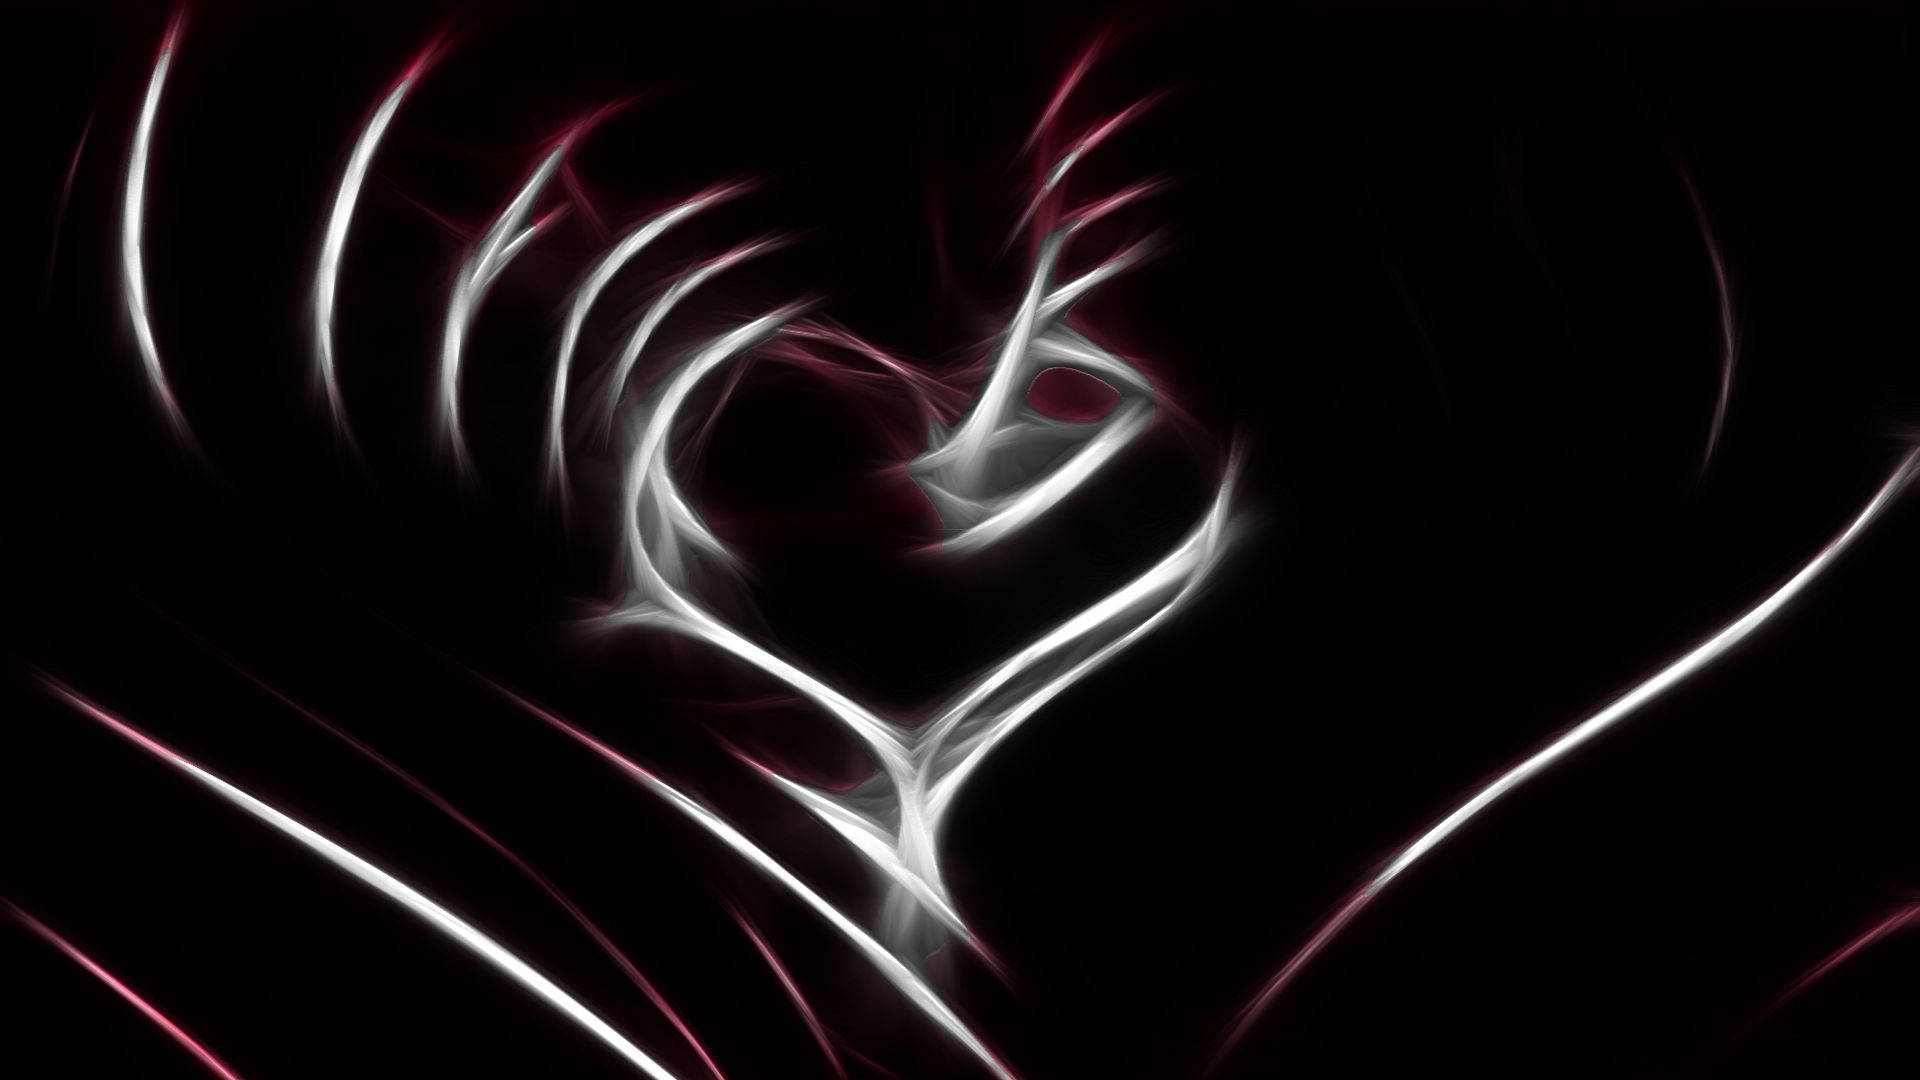 Abstract Black Heart with Stylistic White Lines Wallpaper